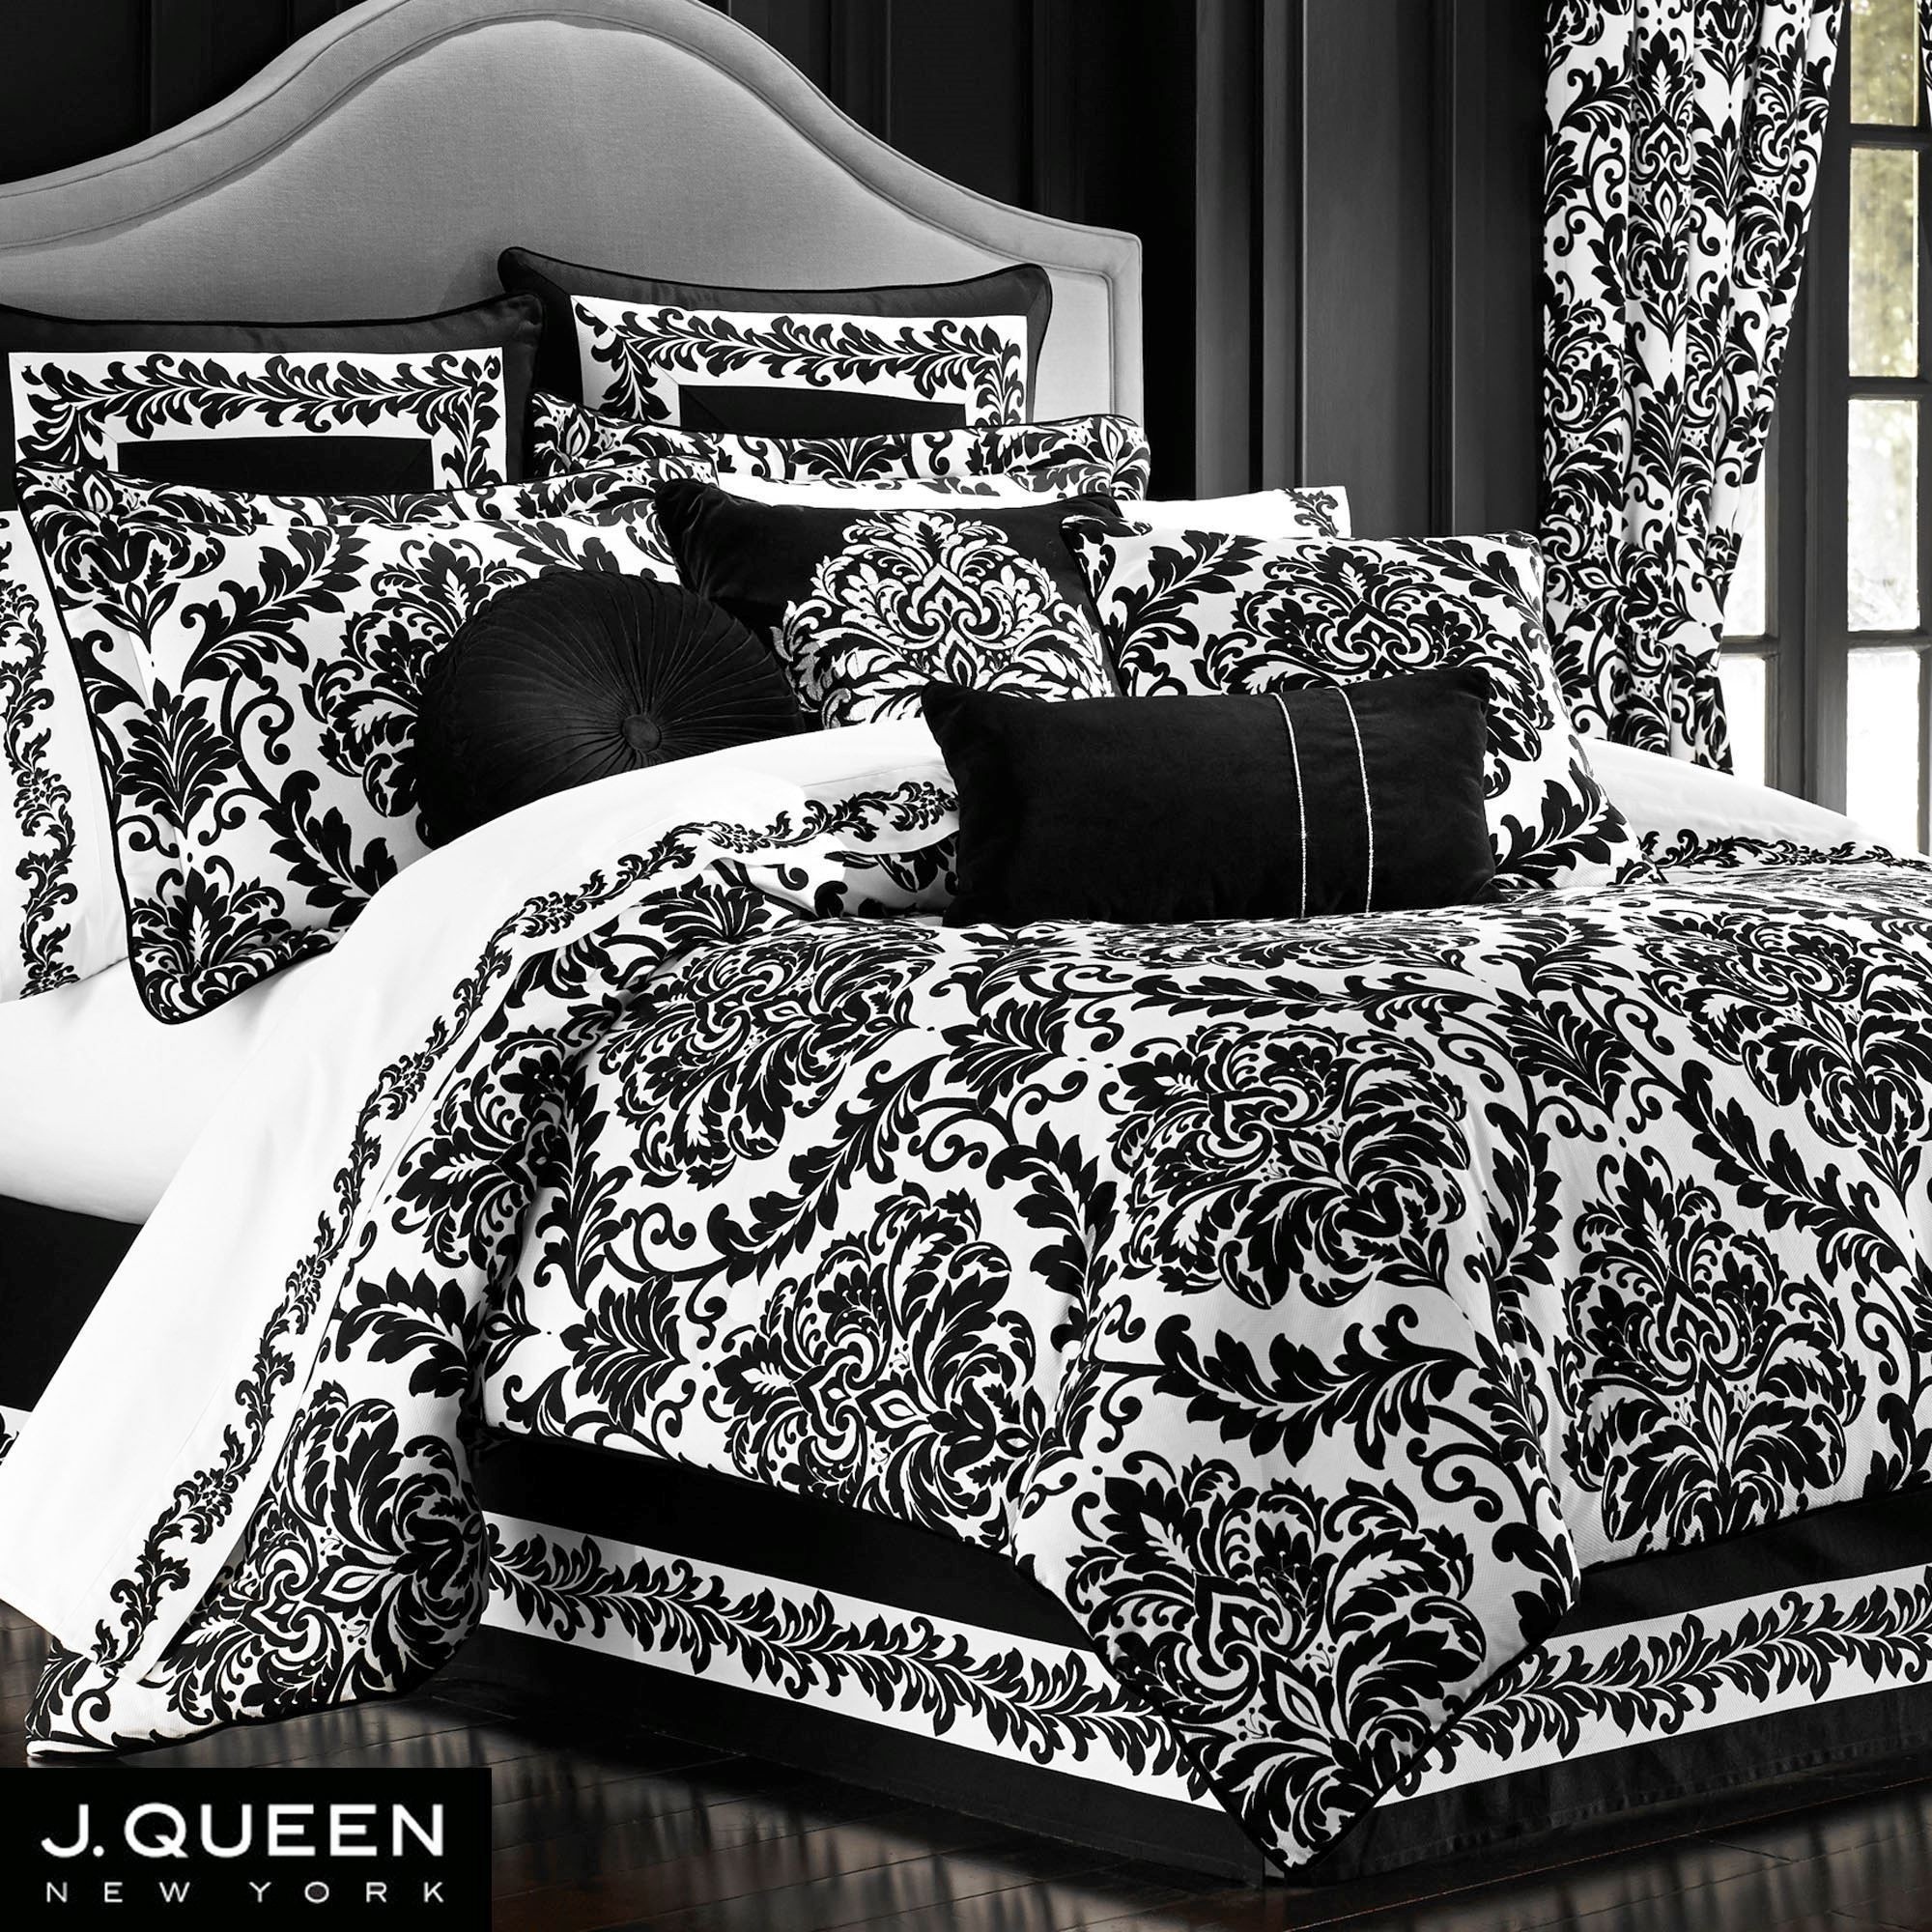 Cambridge black and white damask comforter bedding by j